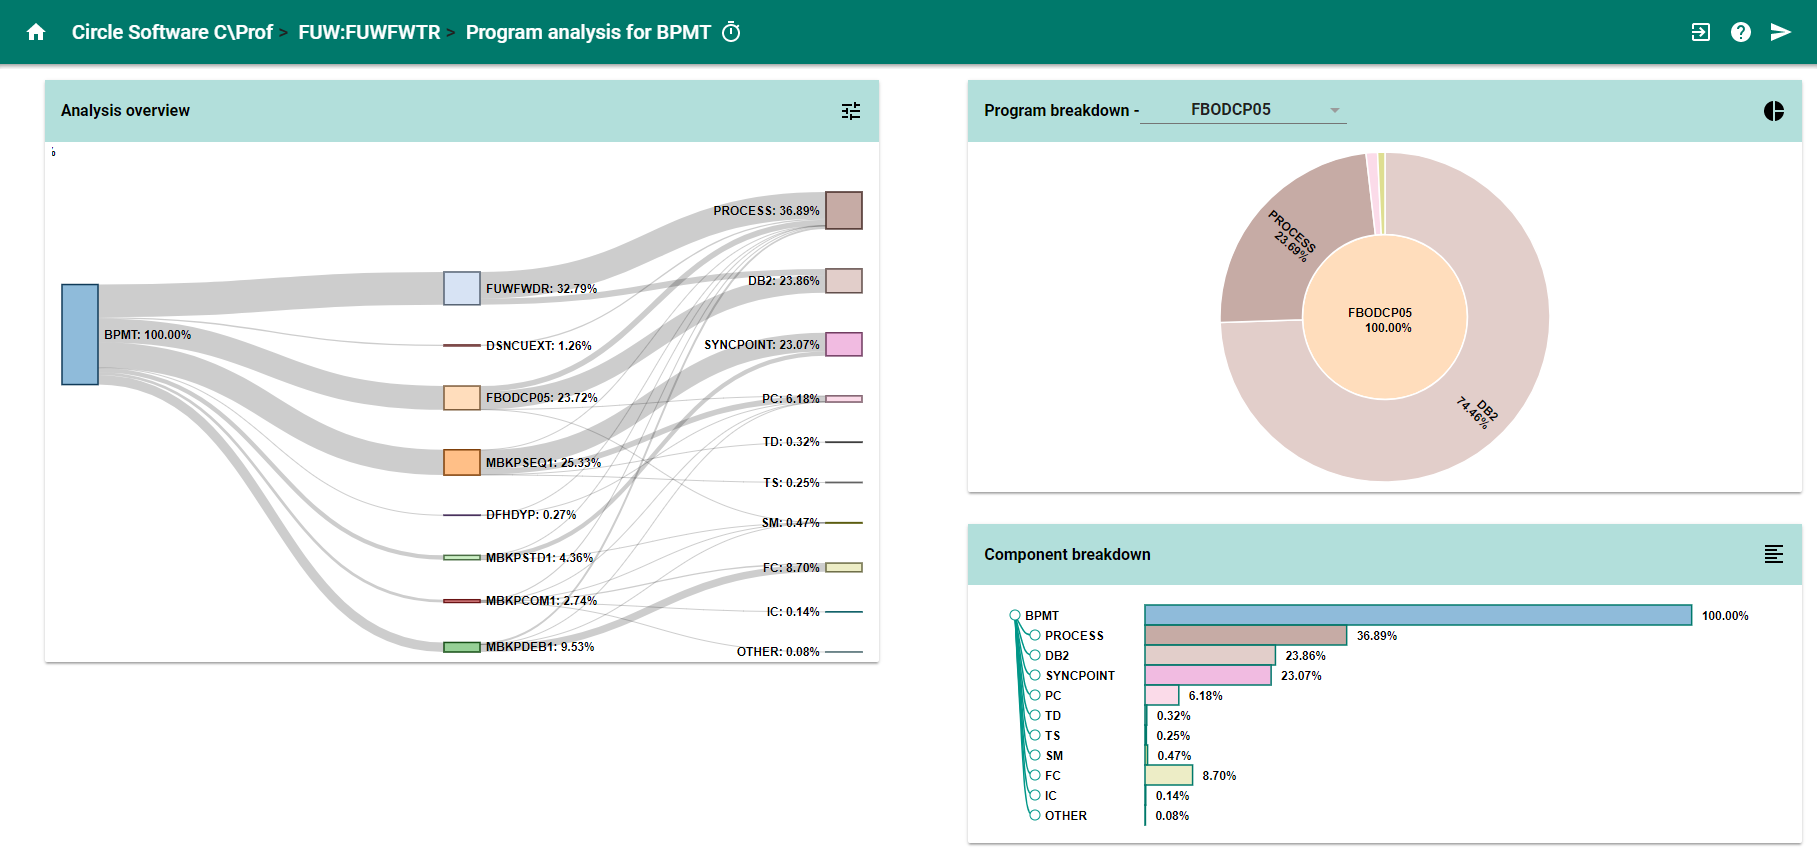 C\\Prof Web UI program analysis dashboard for time spent in CICS transactions